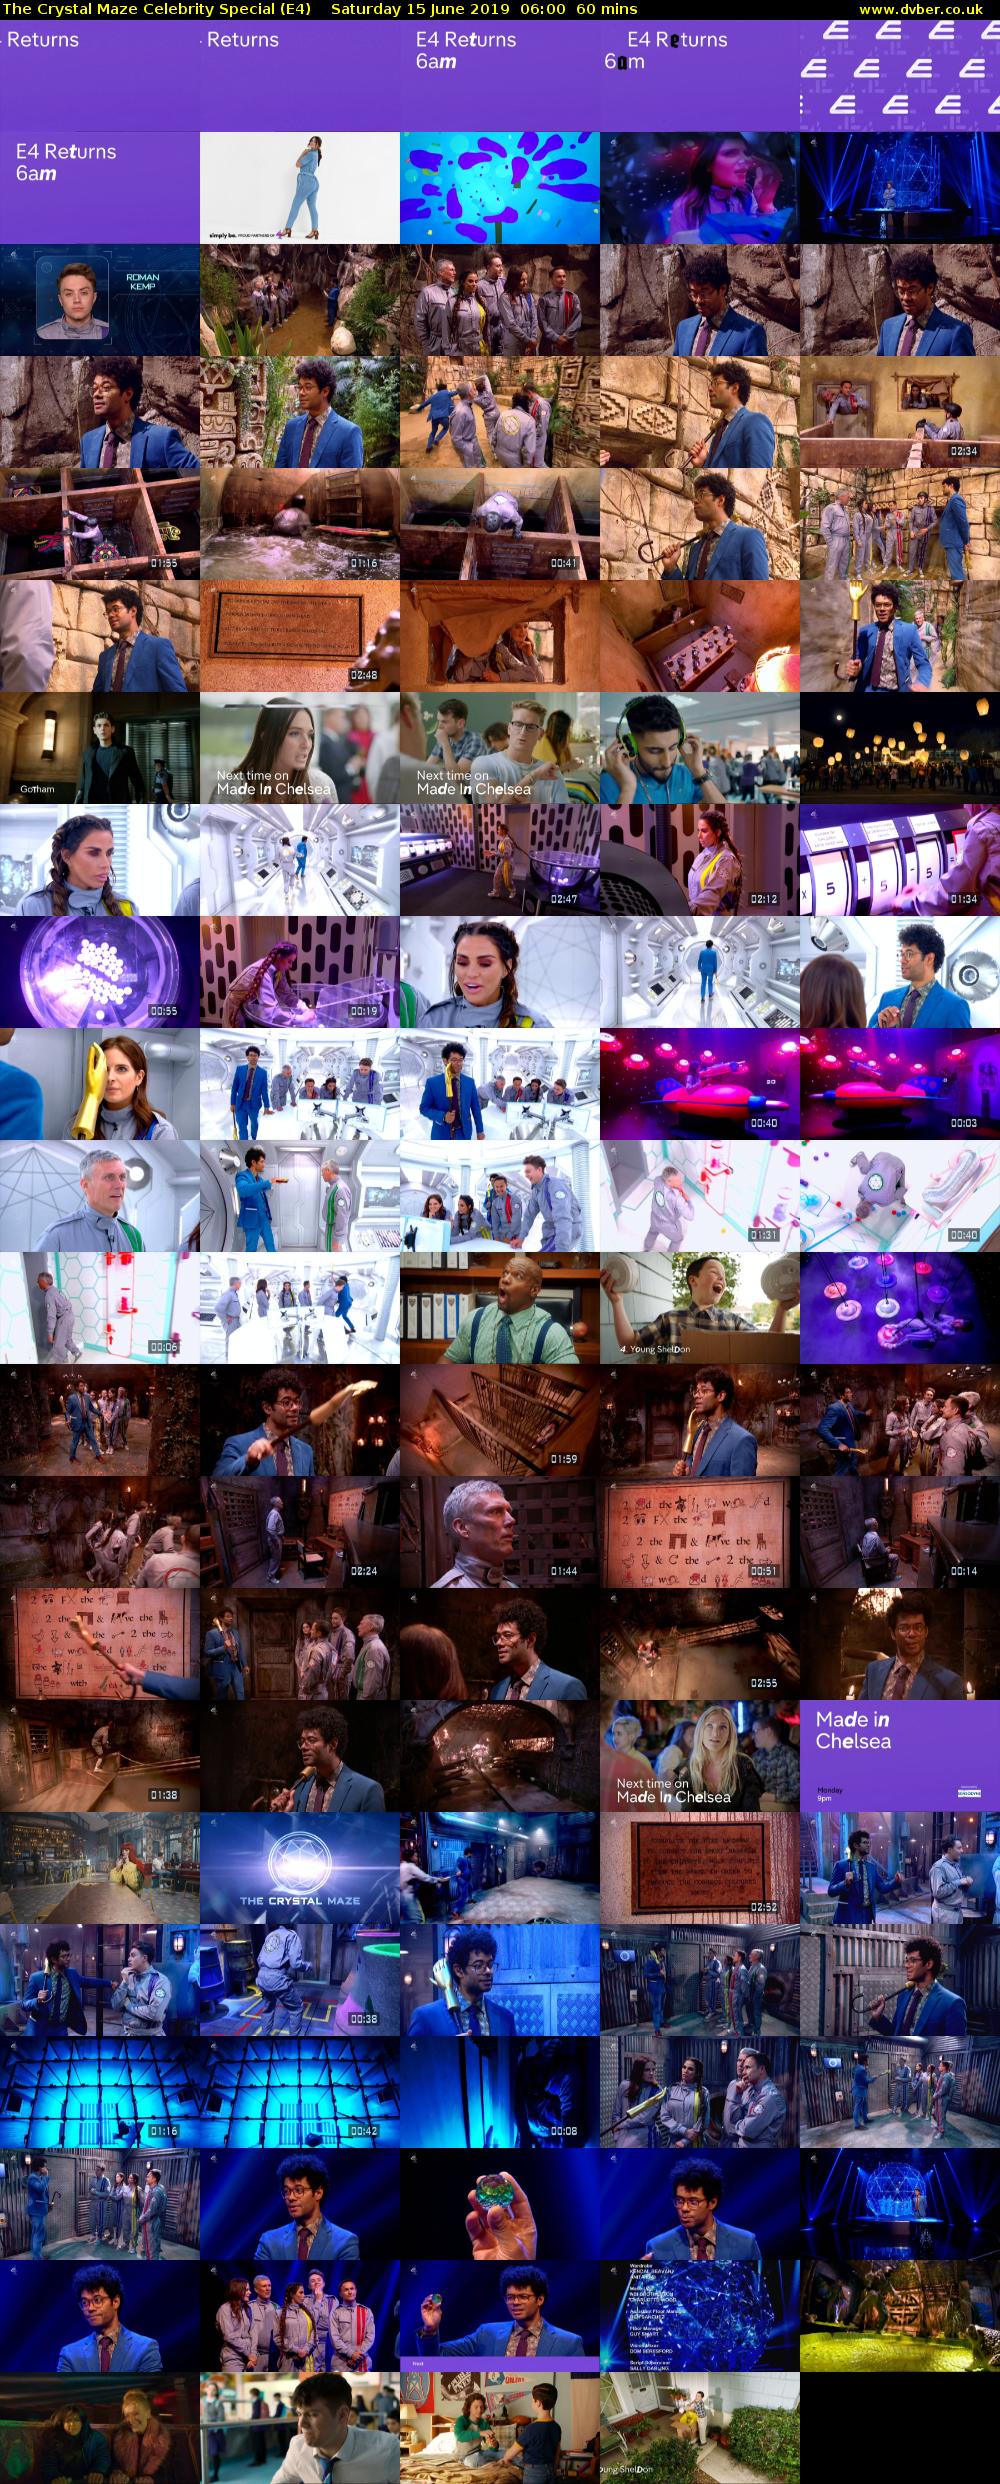 The Crystal Maze Celebrity Special (E4) Saturday 15 June 2019 06:00 - 07:00